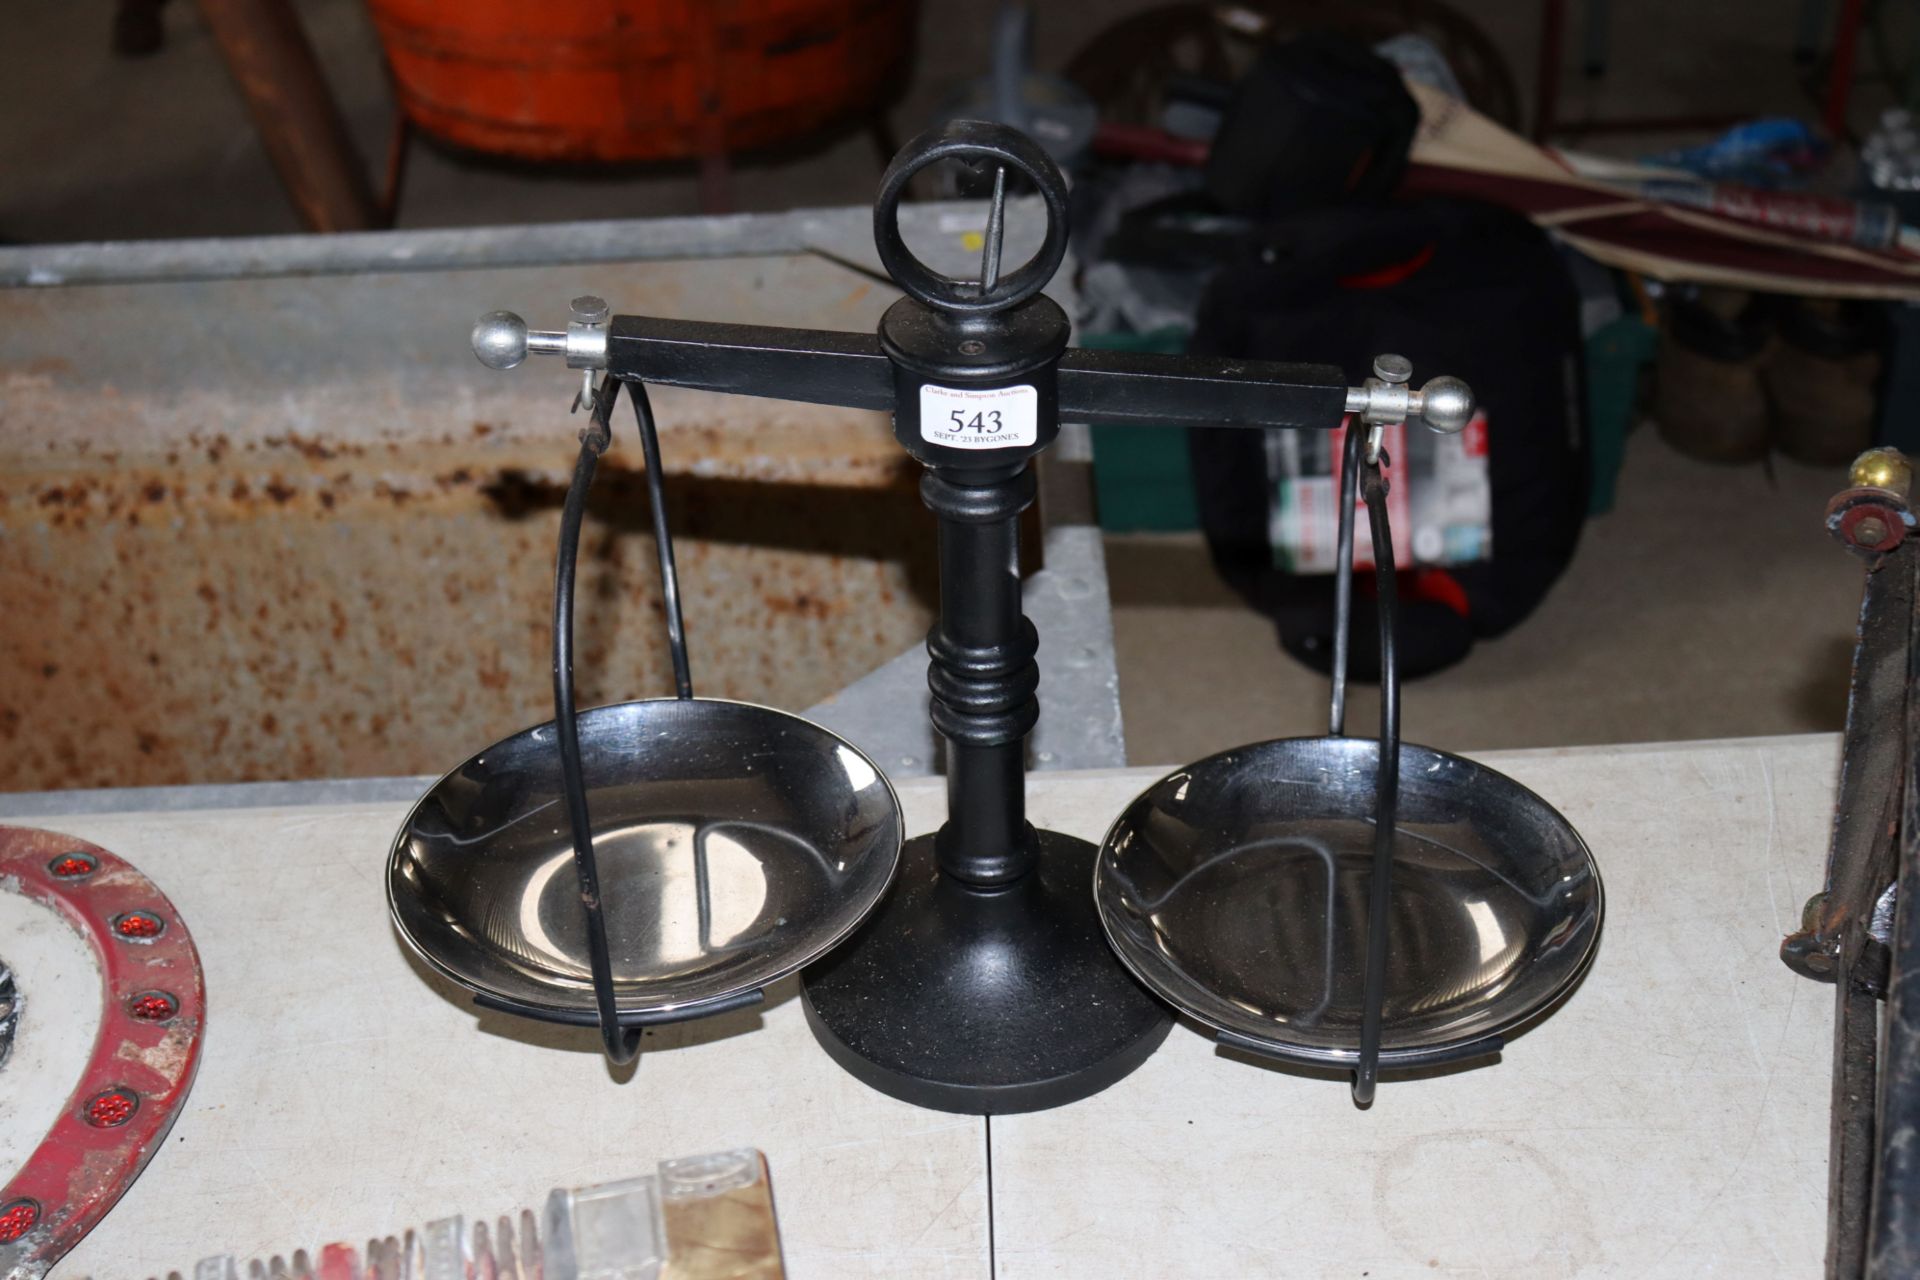 A pair of modern balance scales